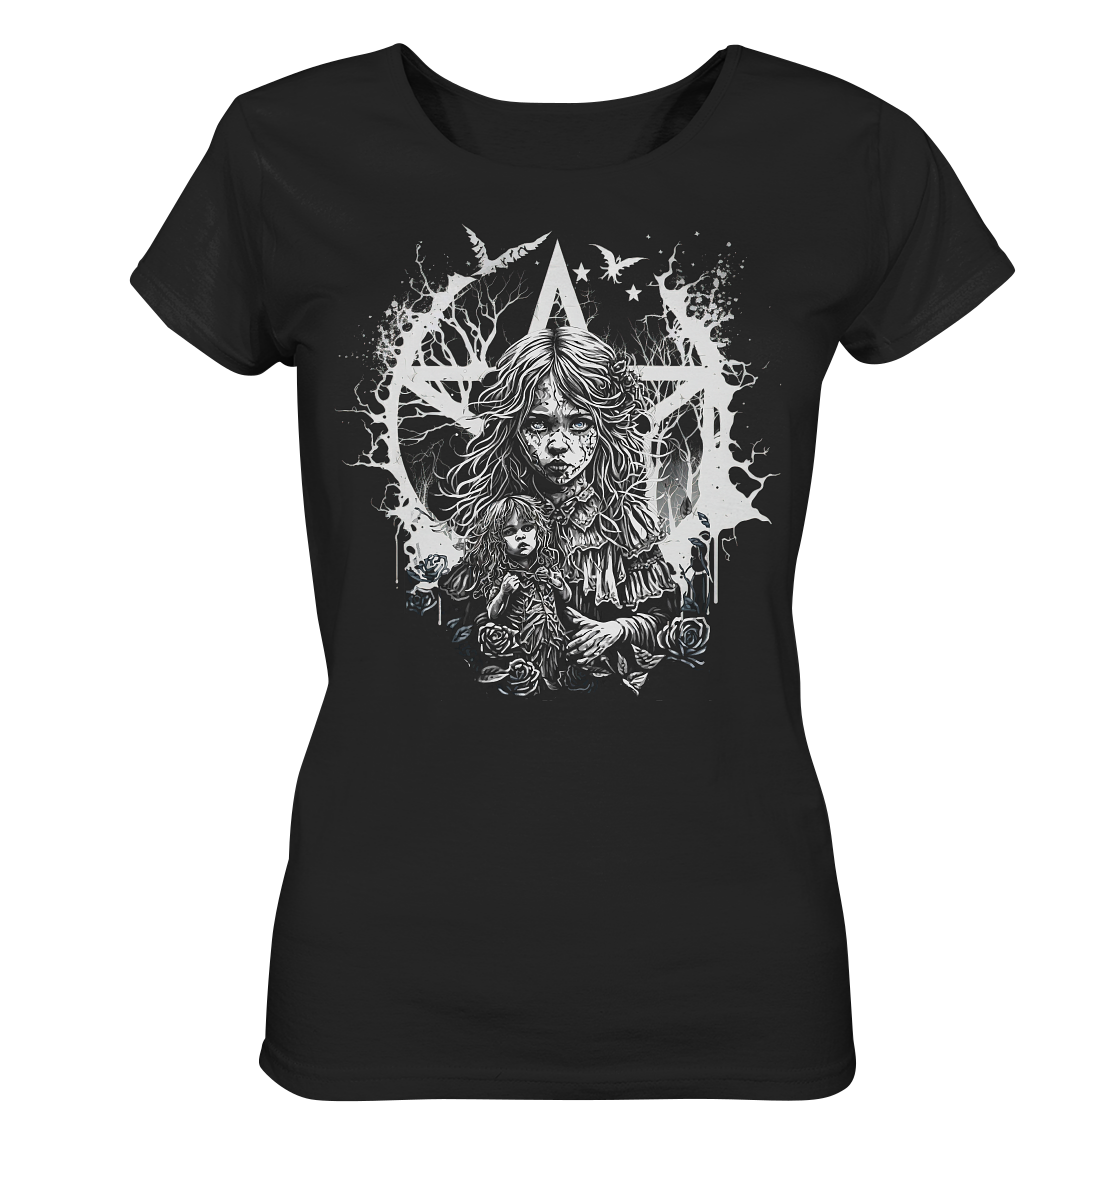 Gothic Girl with Doll - Ladies Organic Shirt